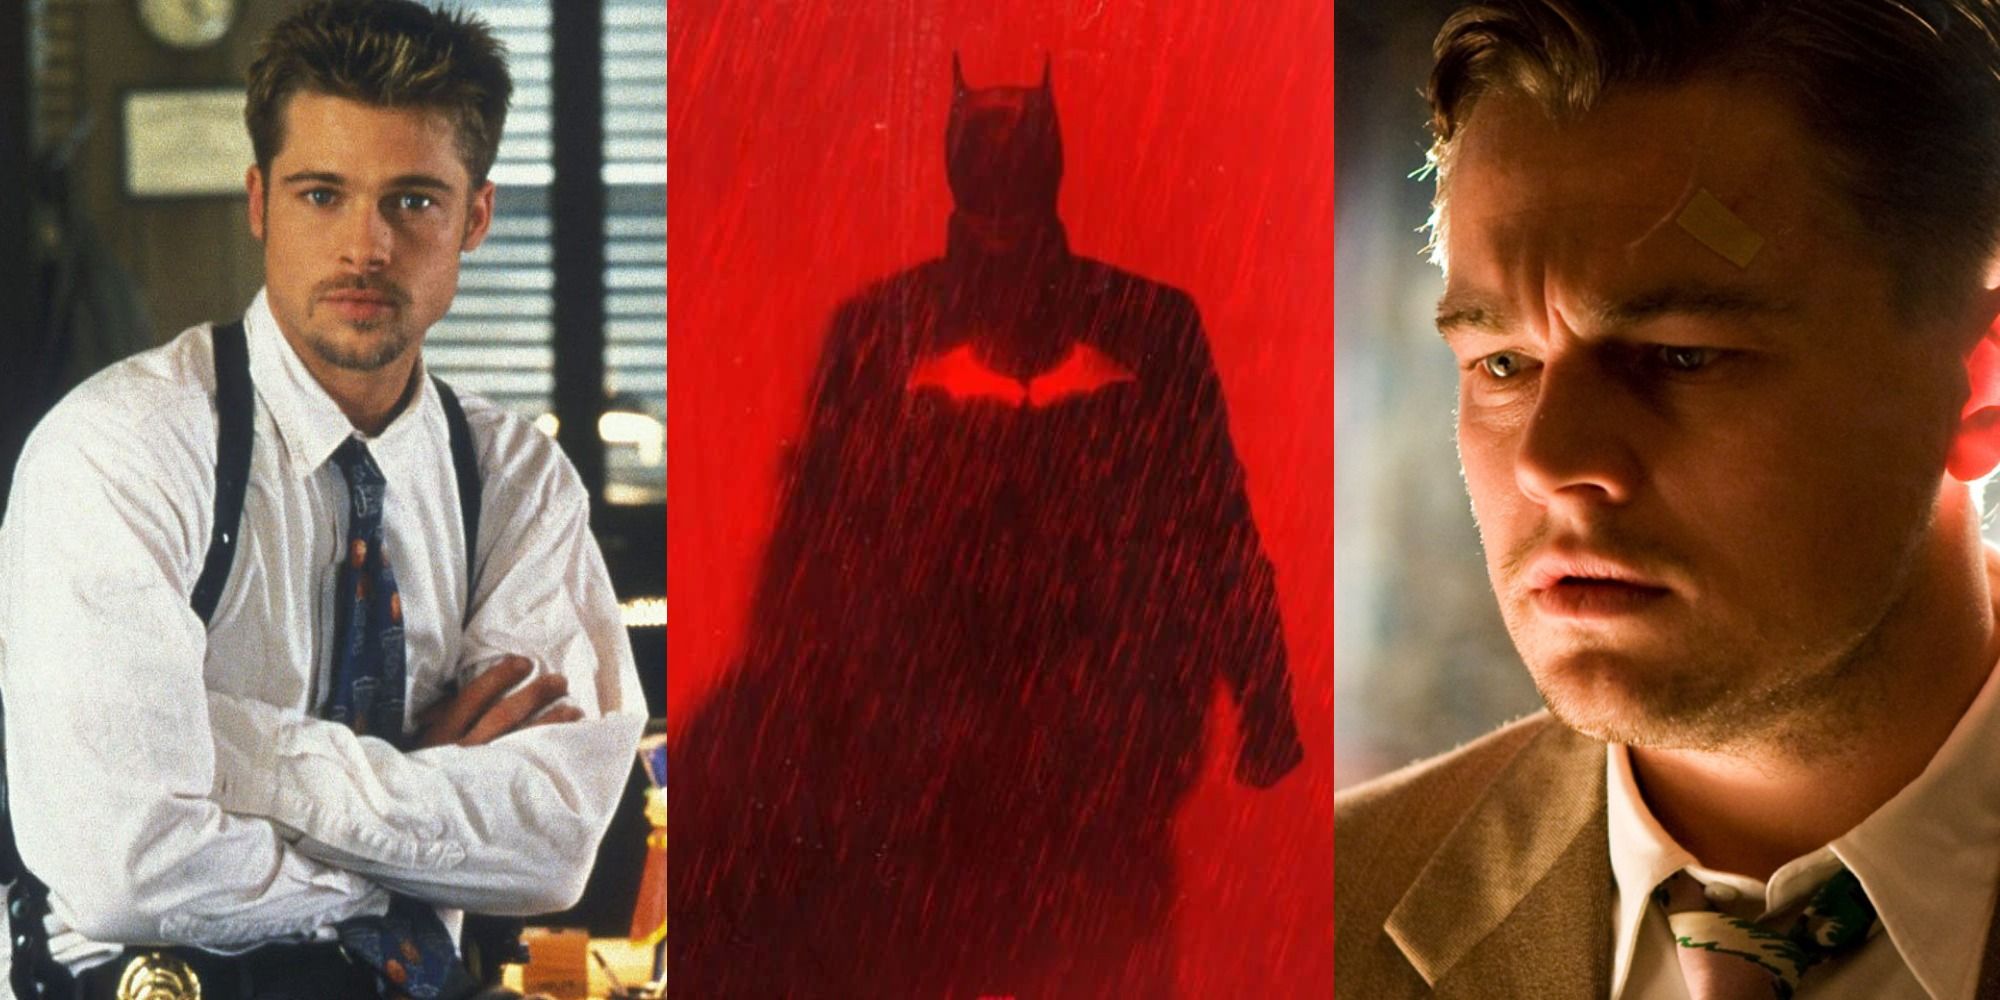 The Batman took inspo from other dark detective movies like Zodiac, Shutter Island and Seven.